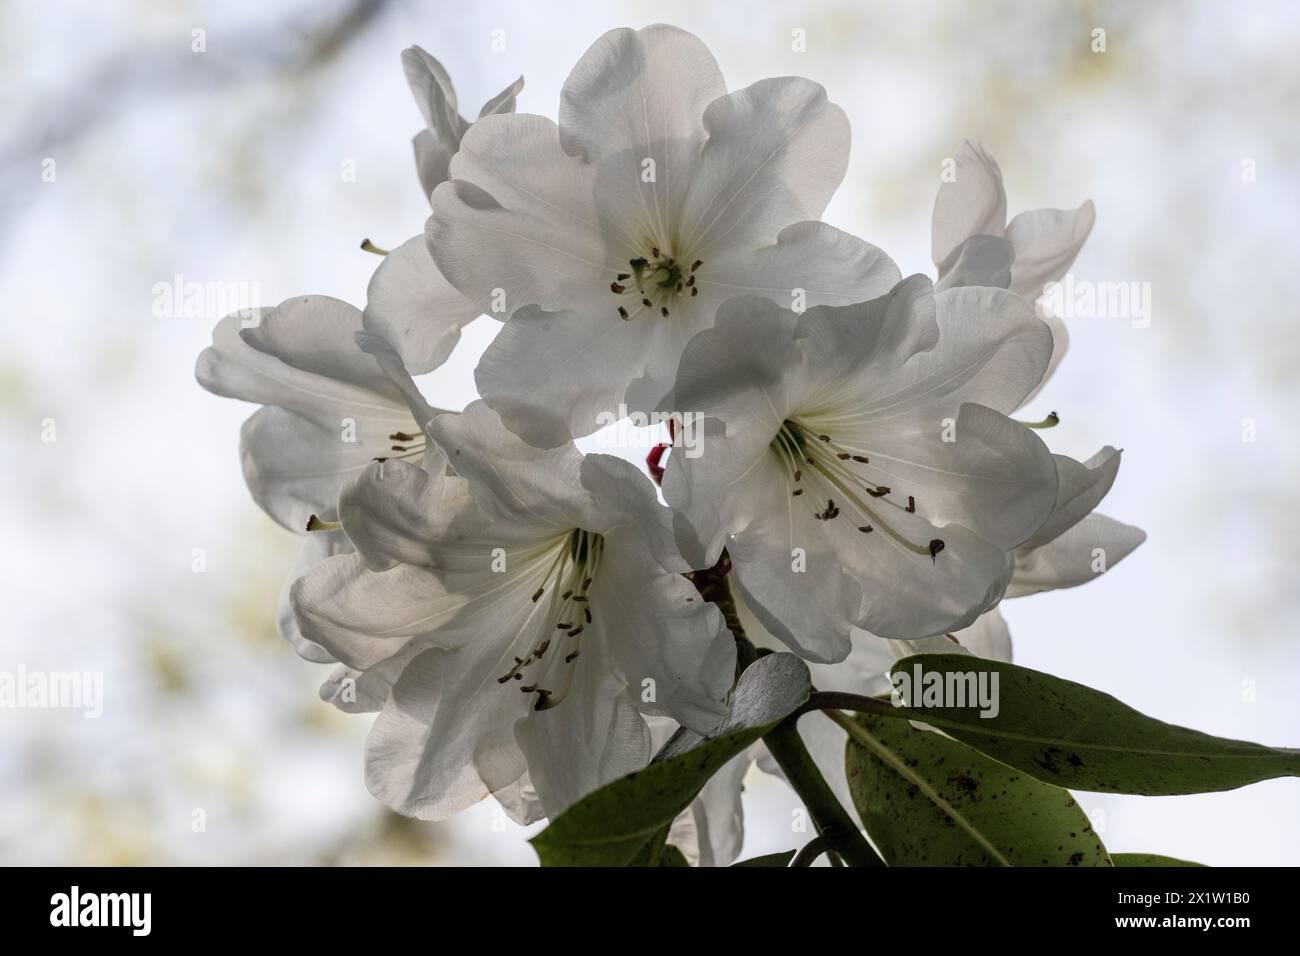 Rhododendron blossom (Rhododendron, hybrid Soulkew), Emsland, Lower Saxony, Germany Stock Photo